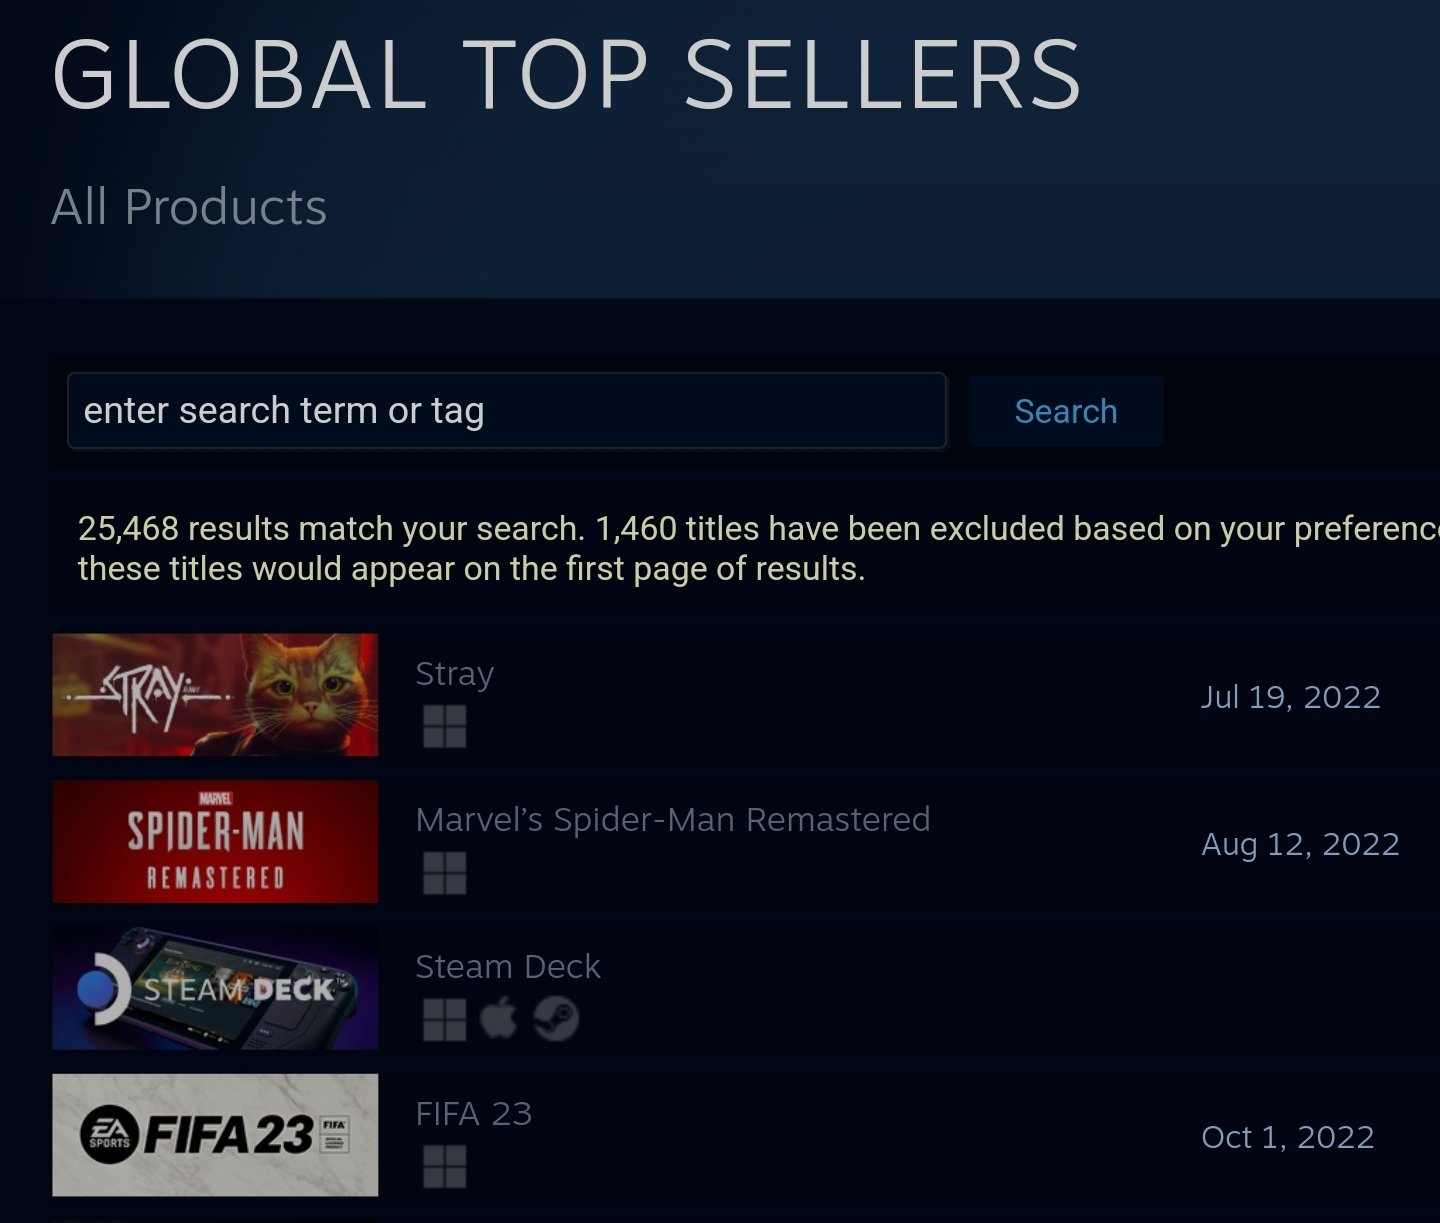 fax Munk mobil Benji-Sales on Twitter: "Spider-Man Remastered for its first day of  Pre-Orders reached the #2 Global Top Selling Game on Steam behind only  Stray (which is doing big numbers) Will be interesting to